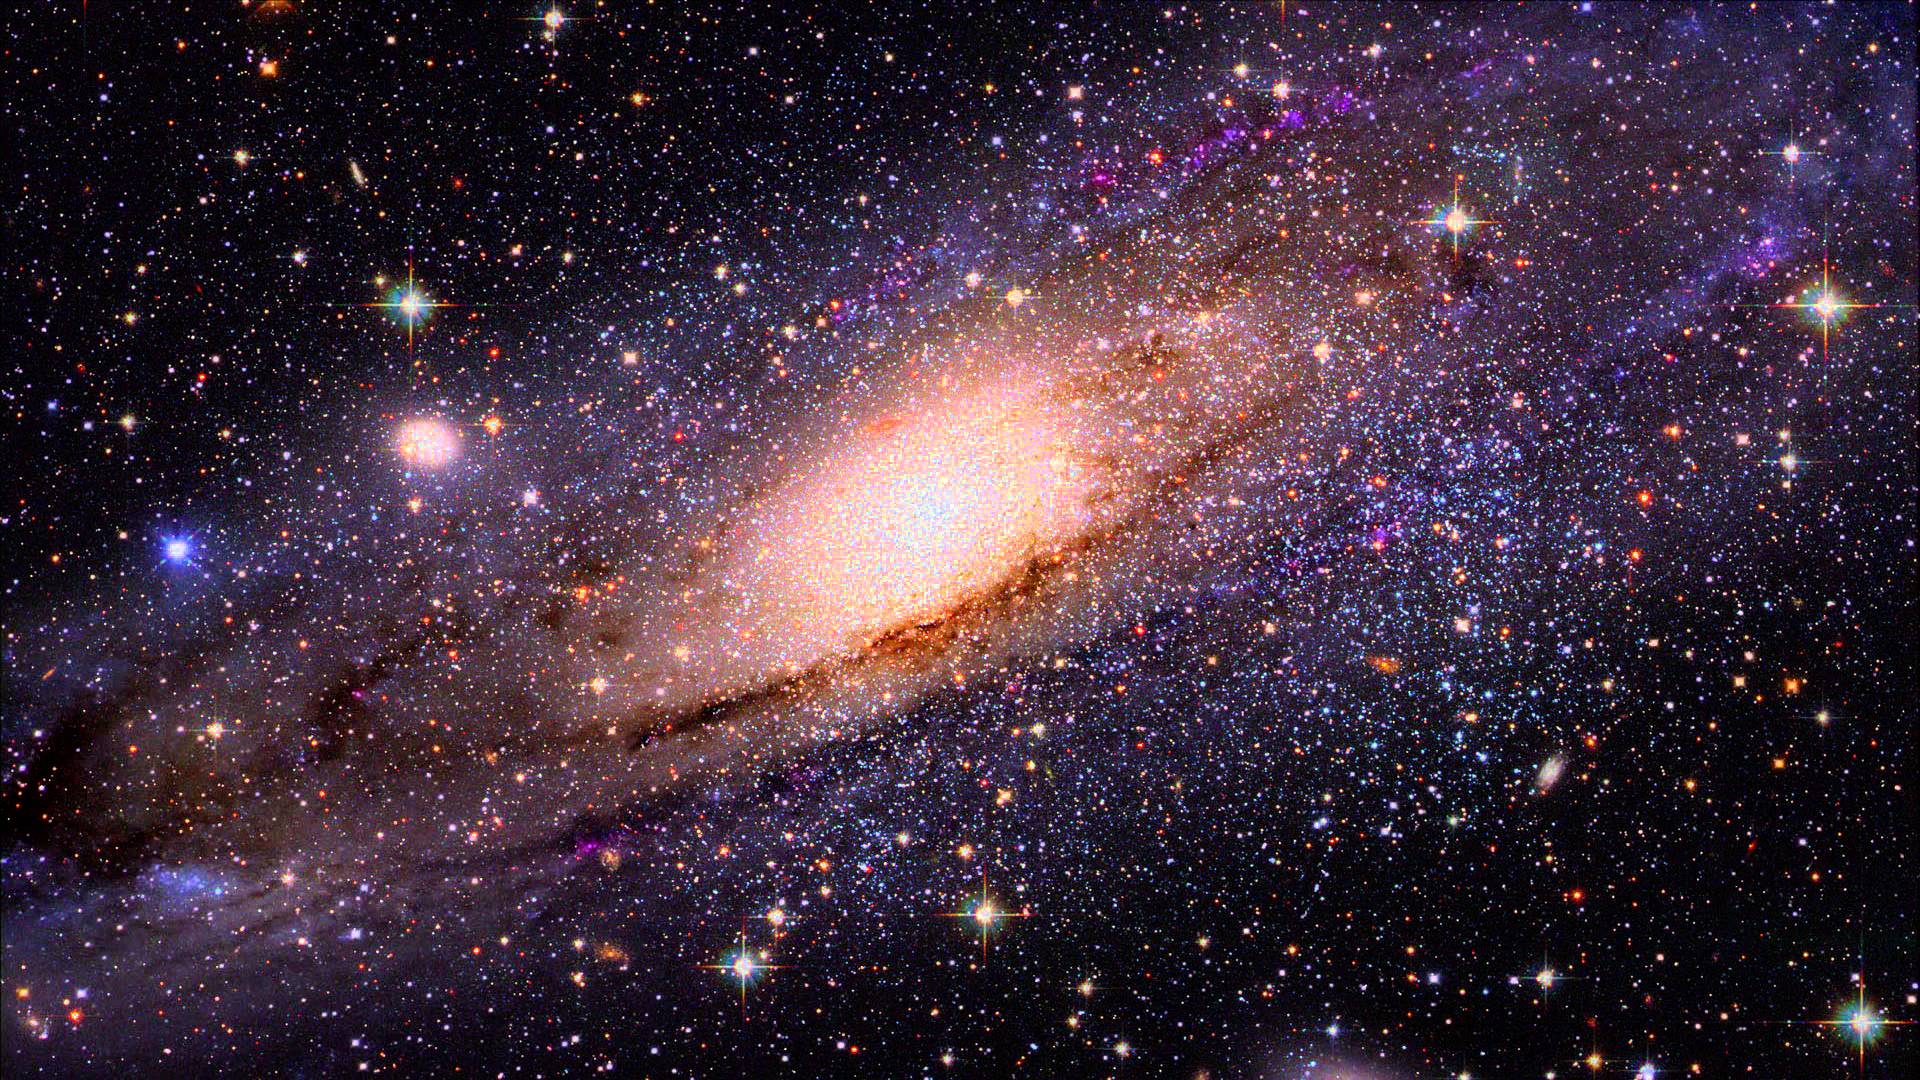 Hubble Space HD Wallpapers 1080P   Pics about space 1920x1080